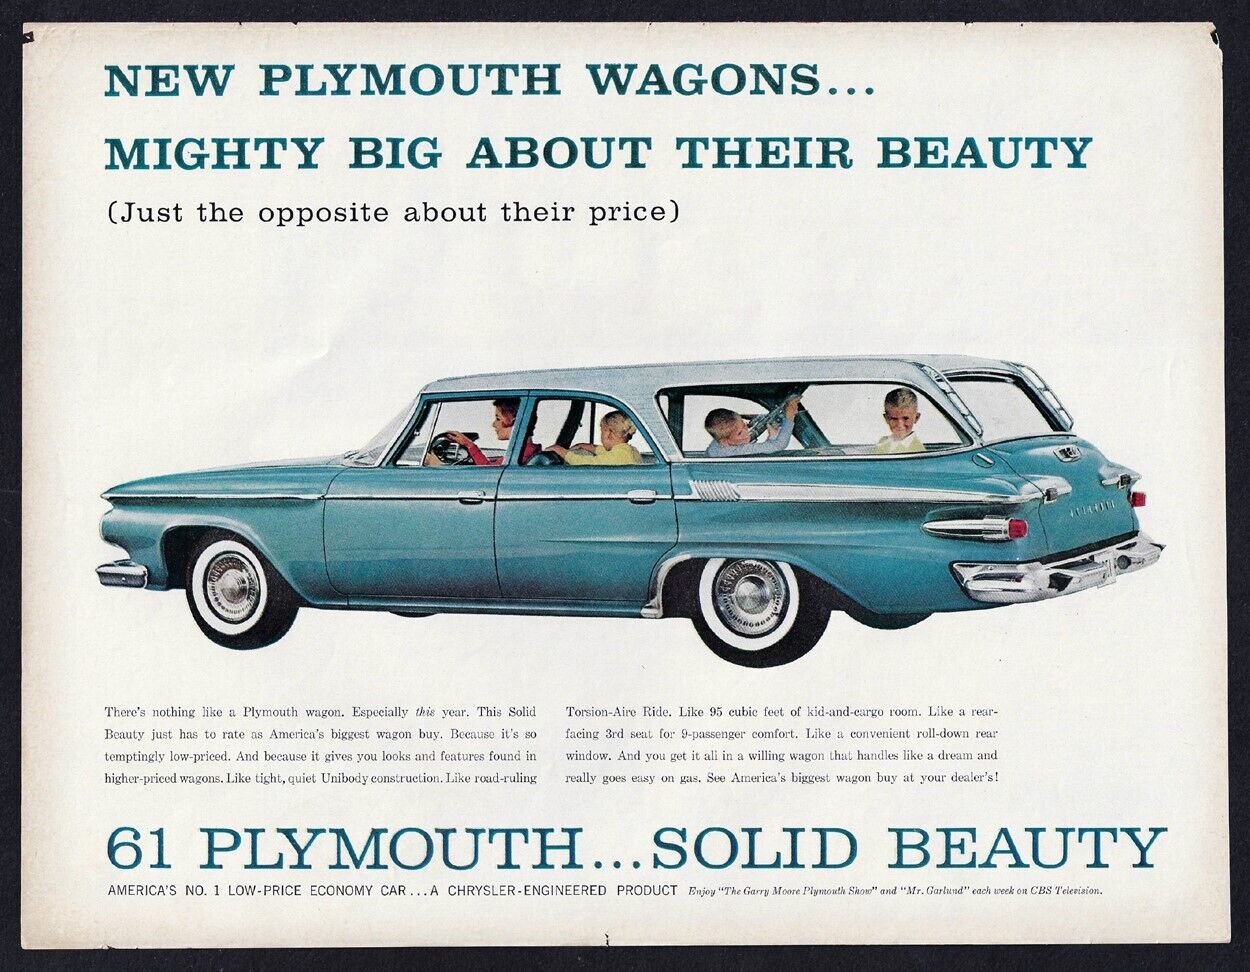 1960 Print Ad for 1961 PLYMOUTH STATION WAGON \